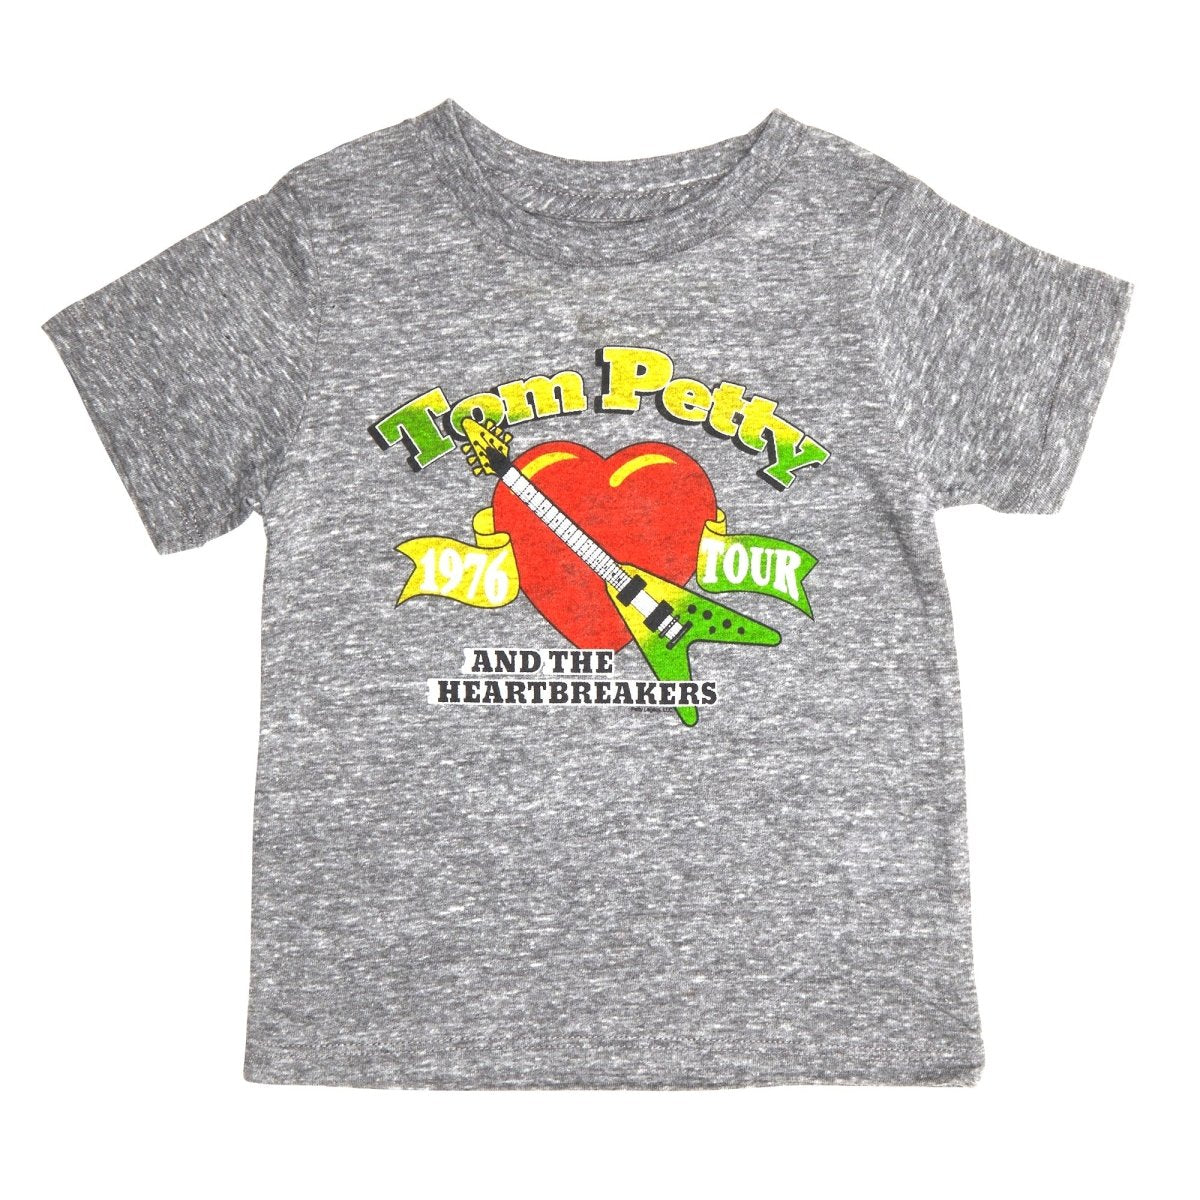 TOM PETTY HEARTBREAKERS TOUR TSHIRT - ROWDY SPROUT